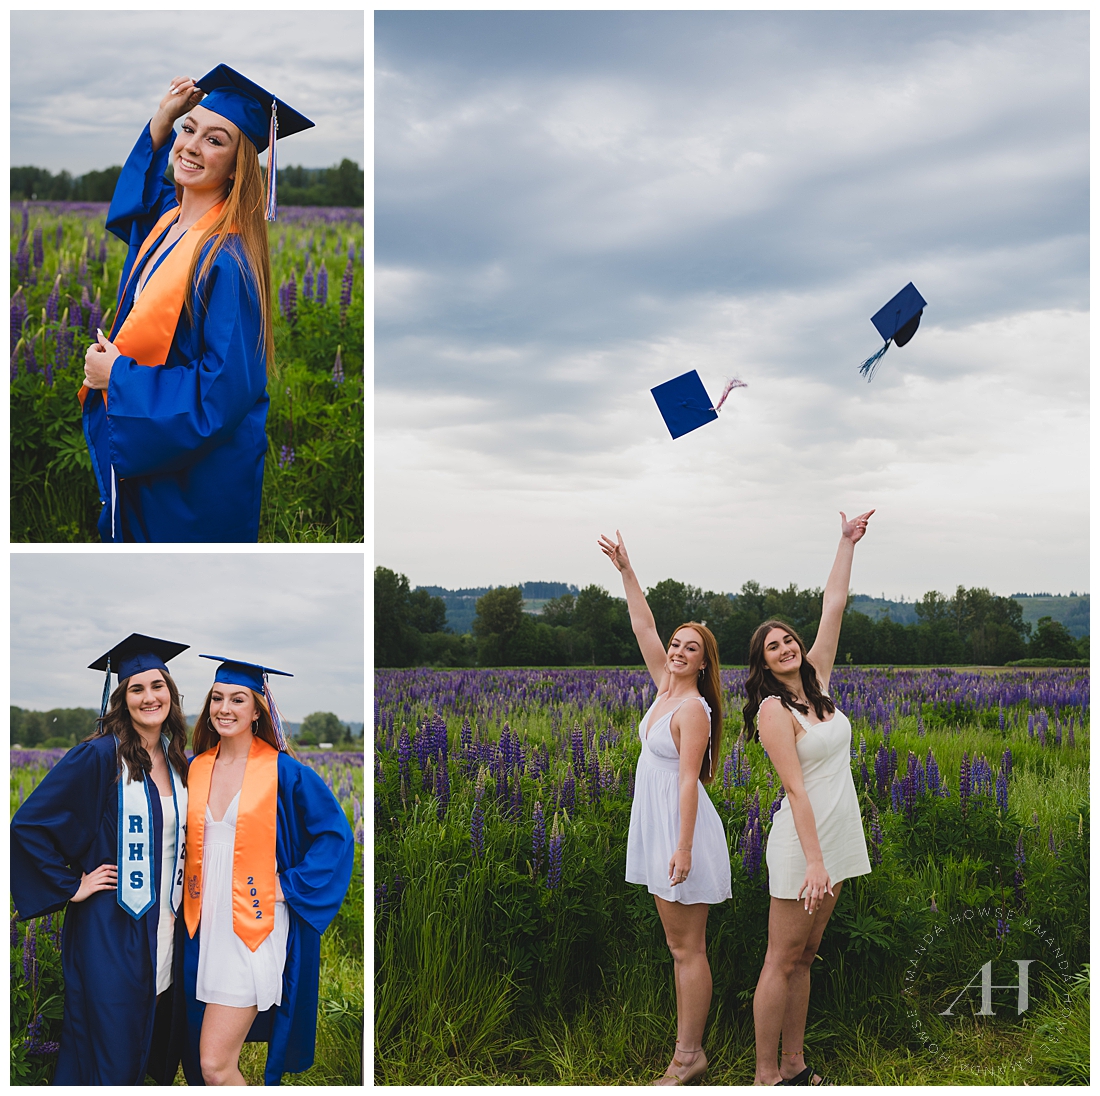 Individual Senior Portraits in a Lupine Field | Graduation Portraits with the AHP Model Team, Cap and Gown Portrait Inspiration, Hair and Makeup Ideas for Graduation | Photographed by the Best Tacoma Senior Portrait Photographer Amanda Howse